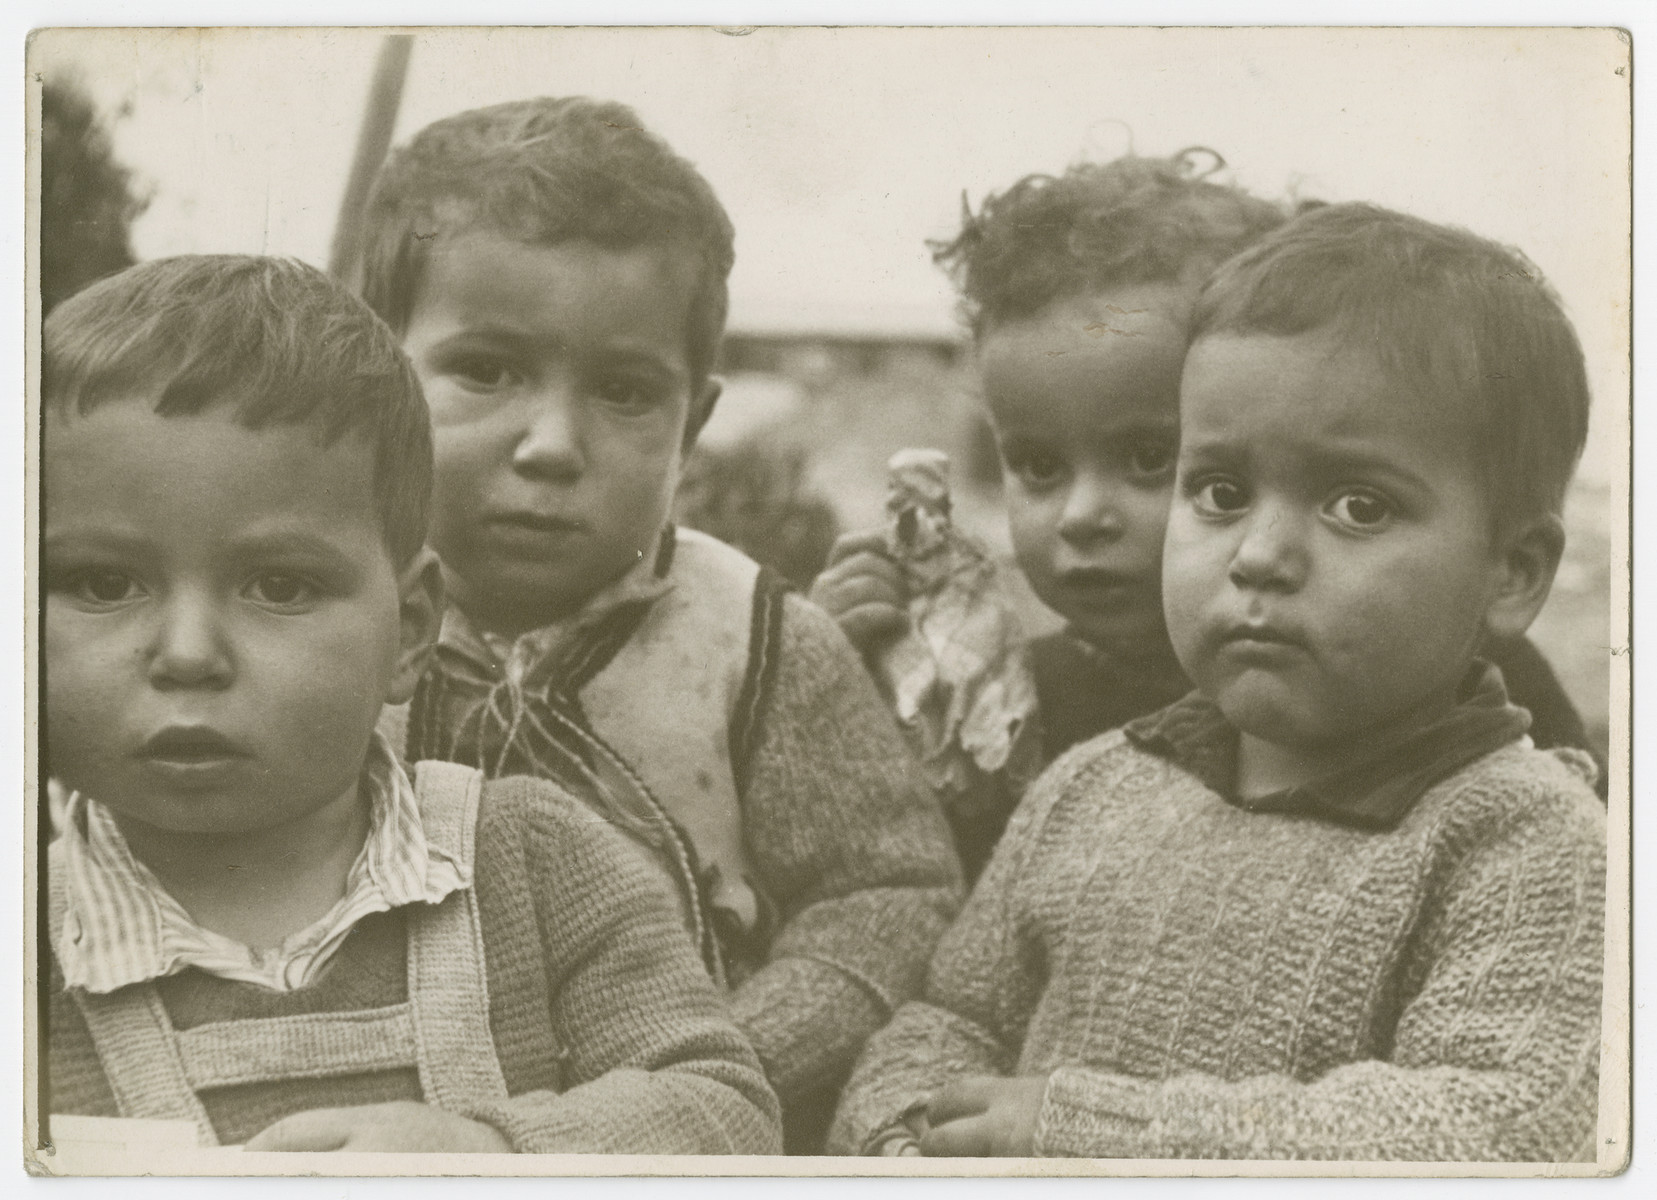 Close-up portrait of four young children.

Photograph is used on page 244 of Robert Gessner's "Some of My Best Friends are Jews."